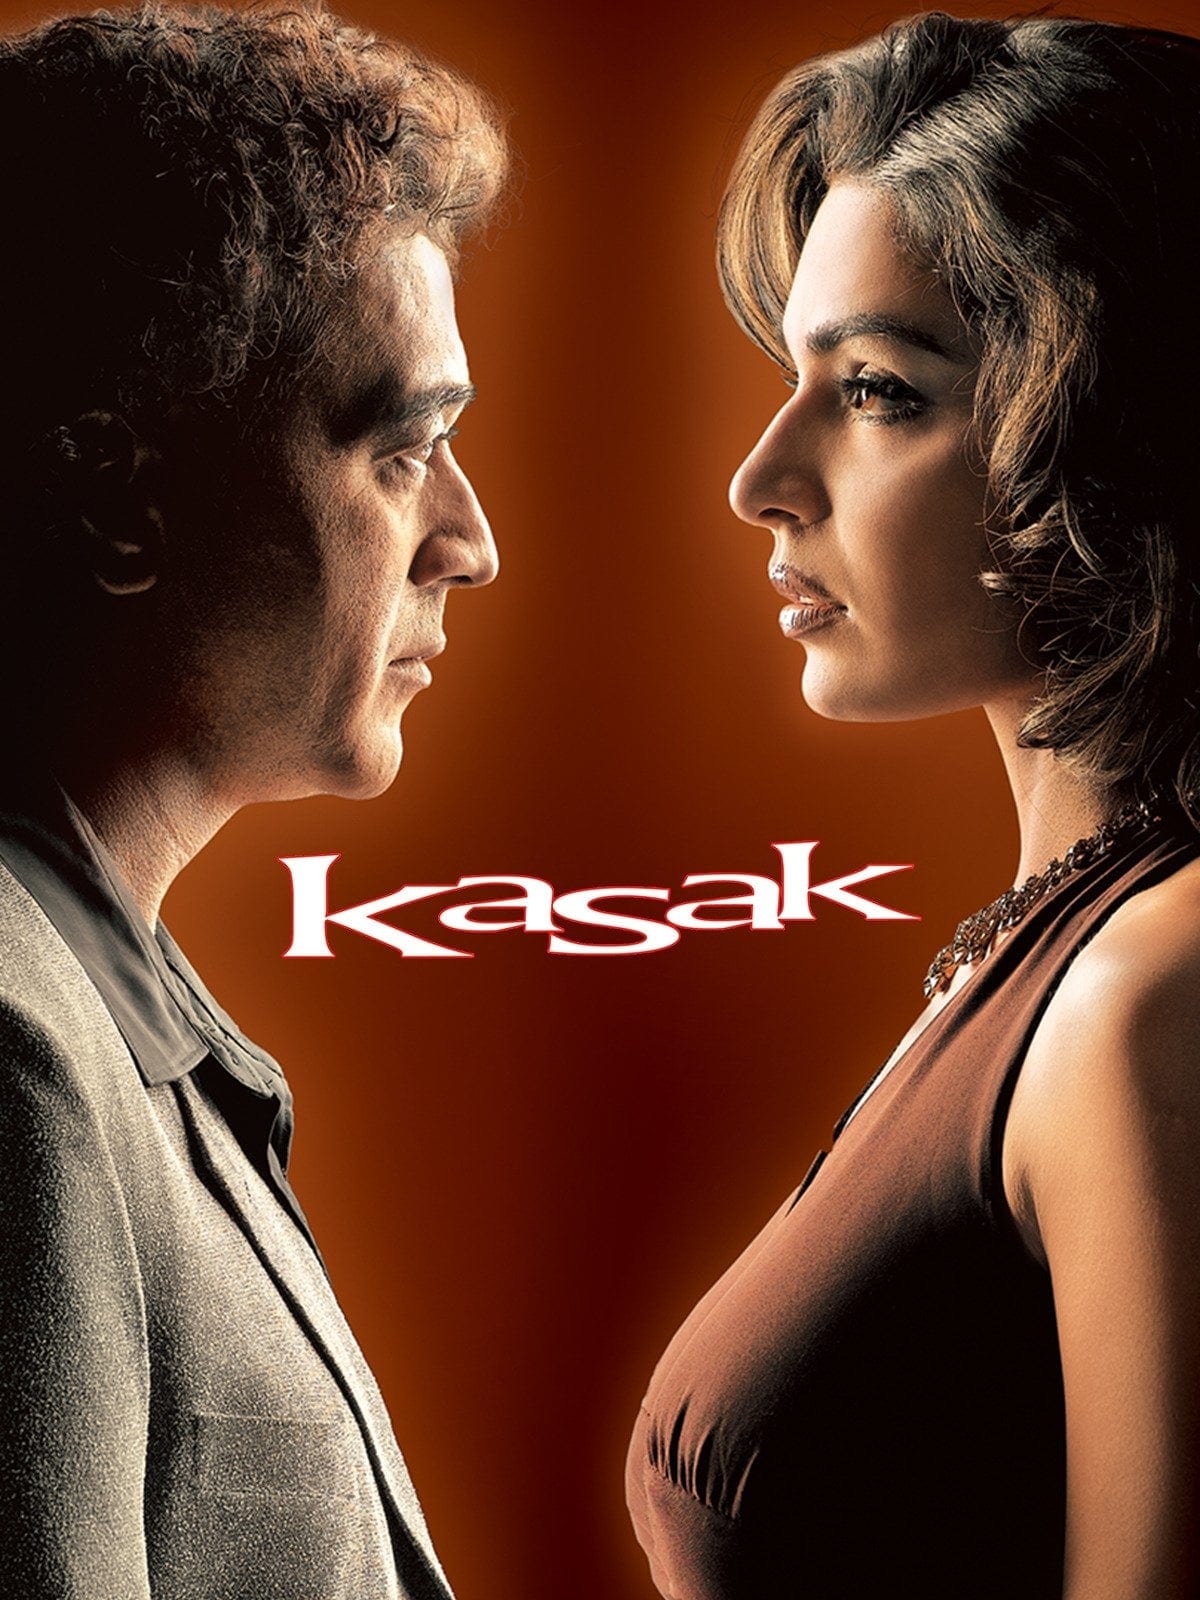 Poster for the movie "Kasak"